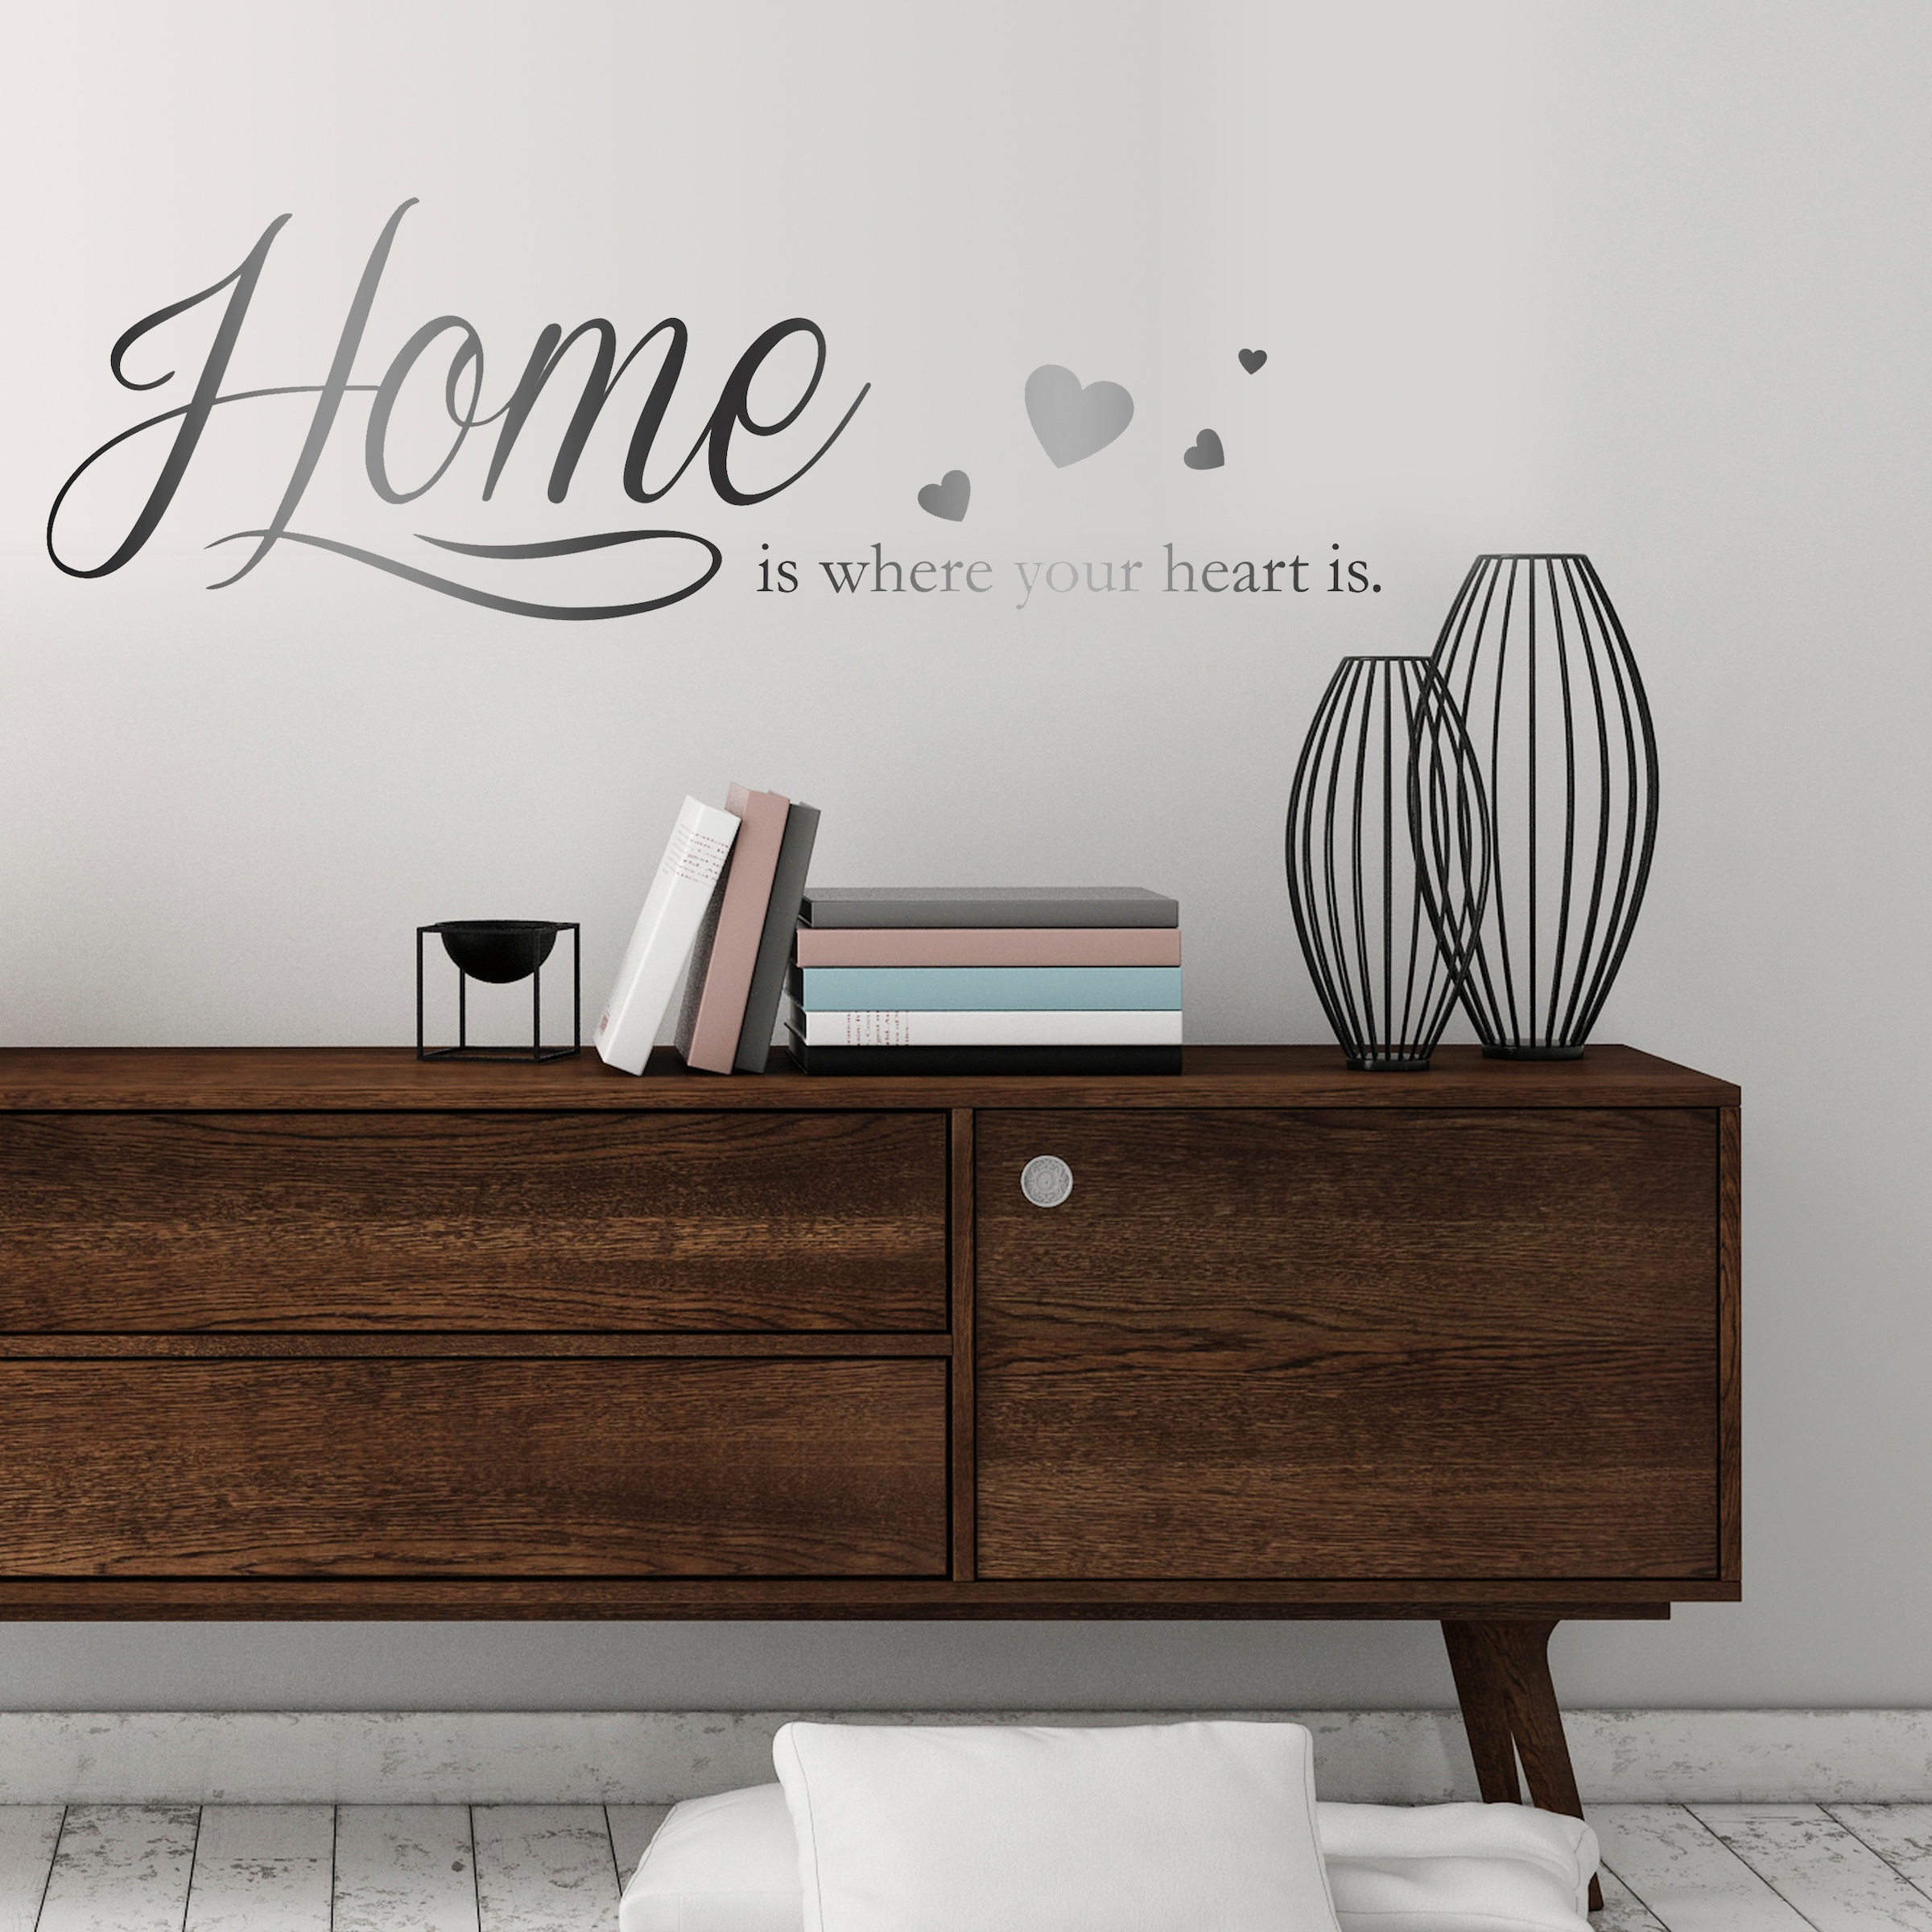 BAUR queence cm kaufen is«, Wandtattoo 120 | your where »Home 30 is x heart